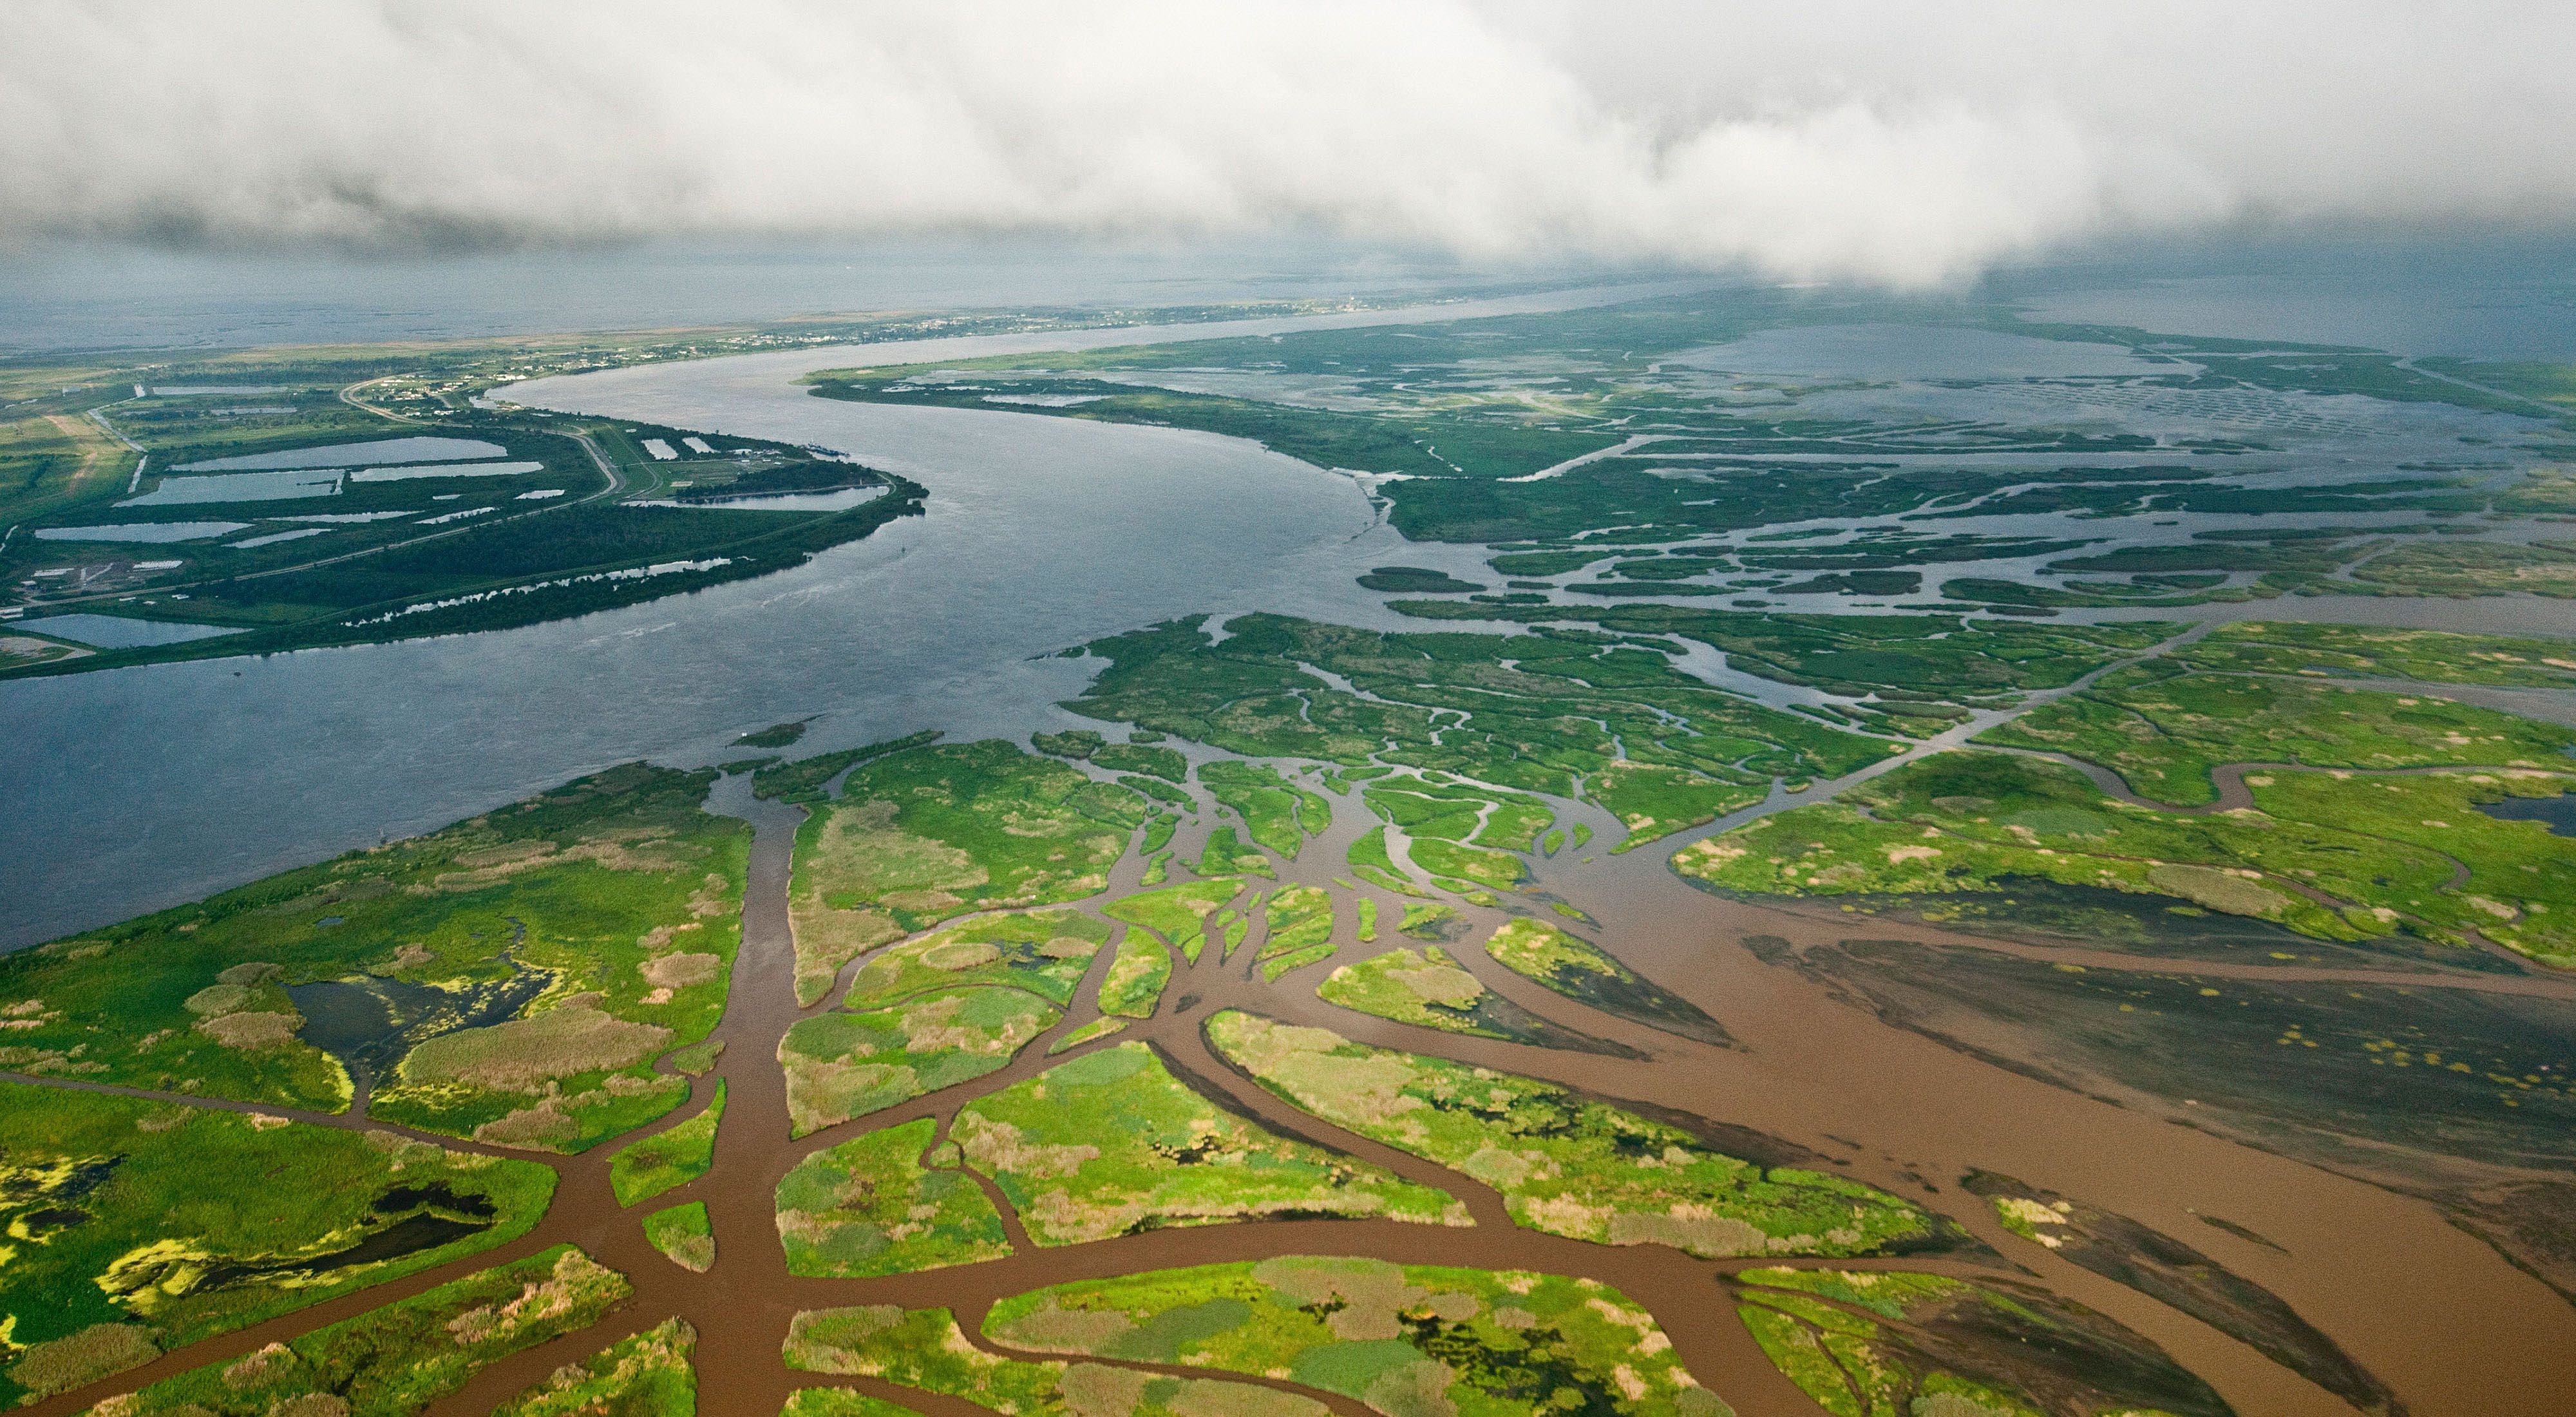 Aerial view of the Mississippi River and many tributaries criss-crossing green wetlands in the Mississippi Delta.